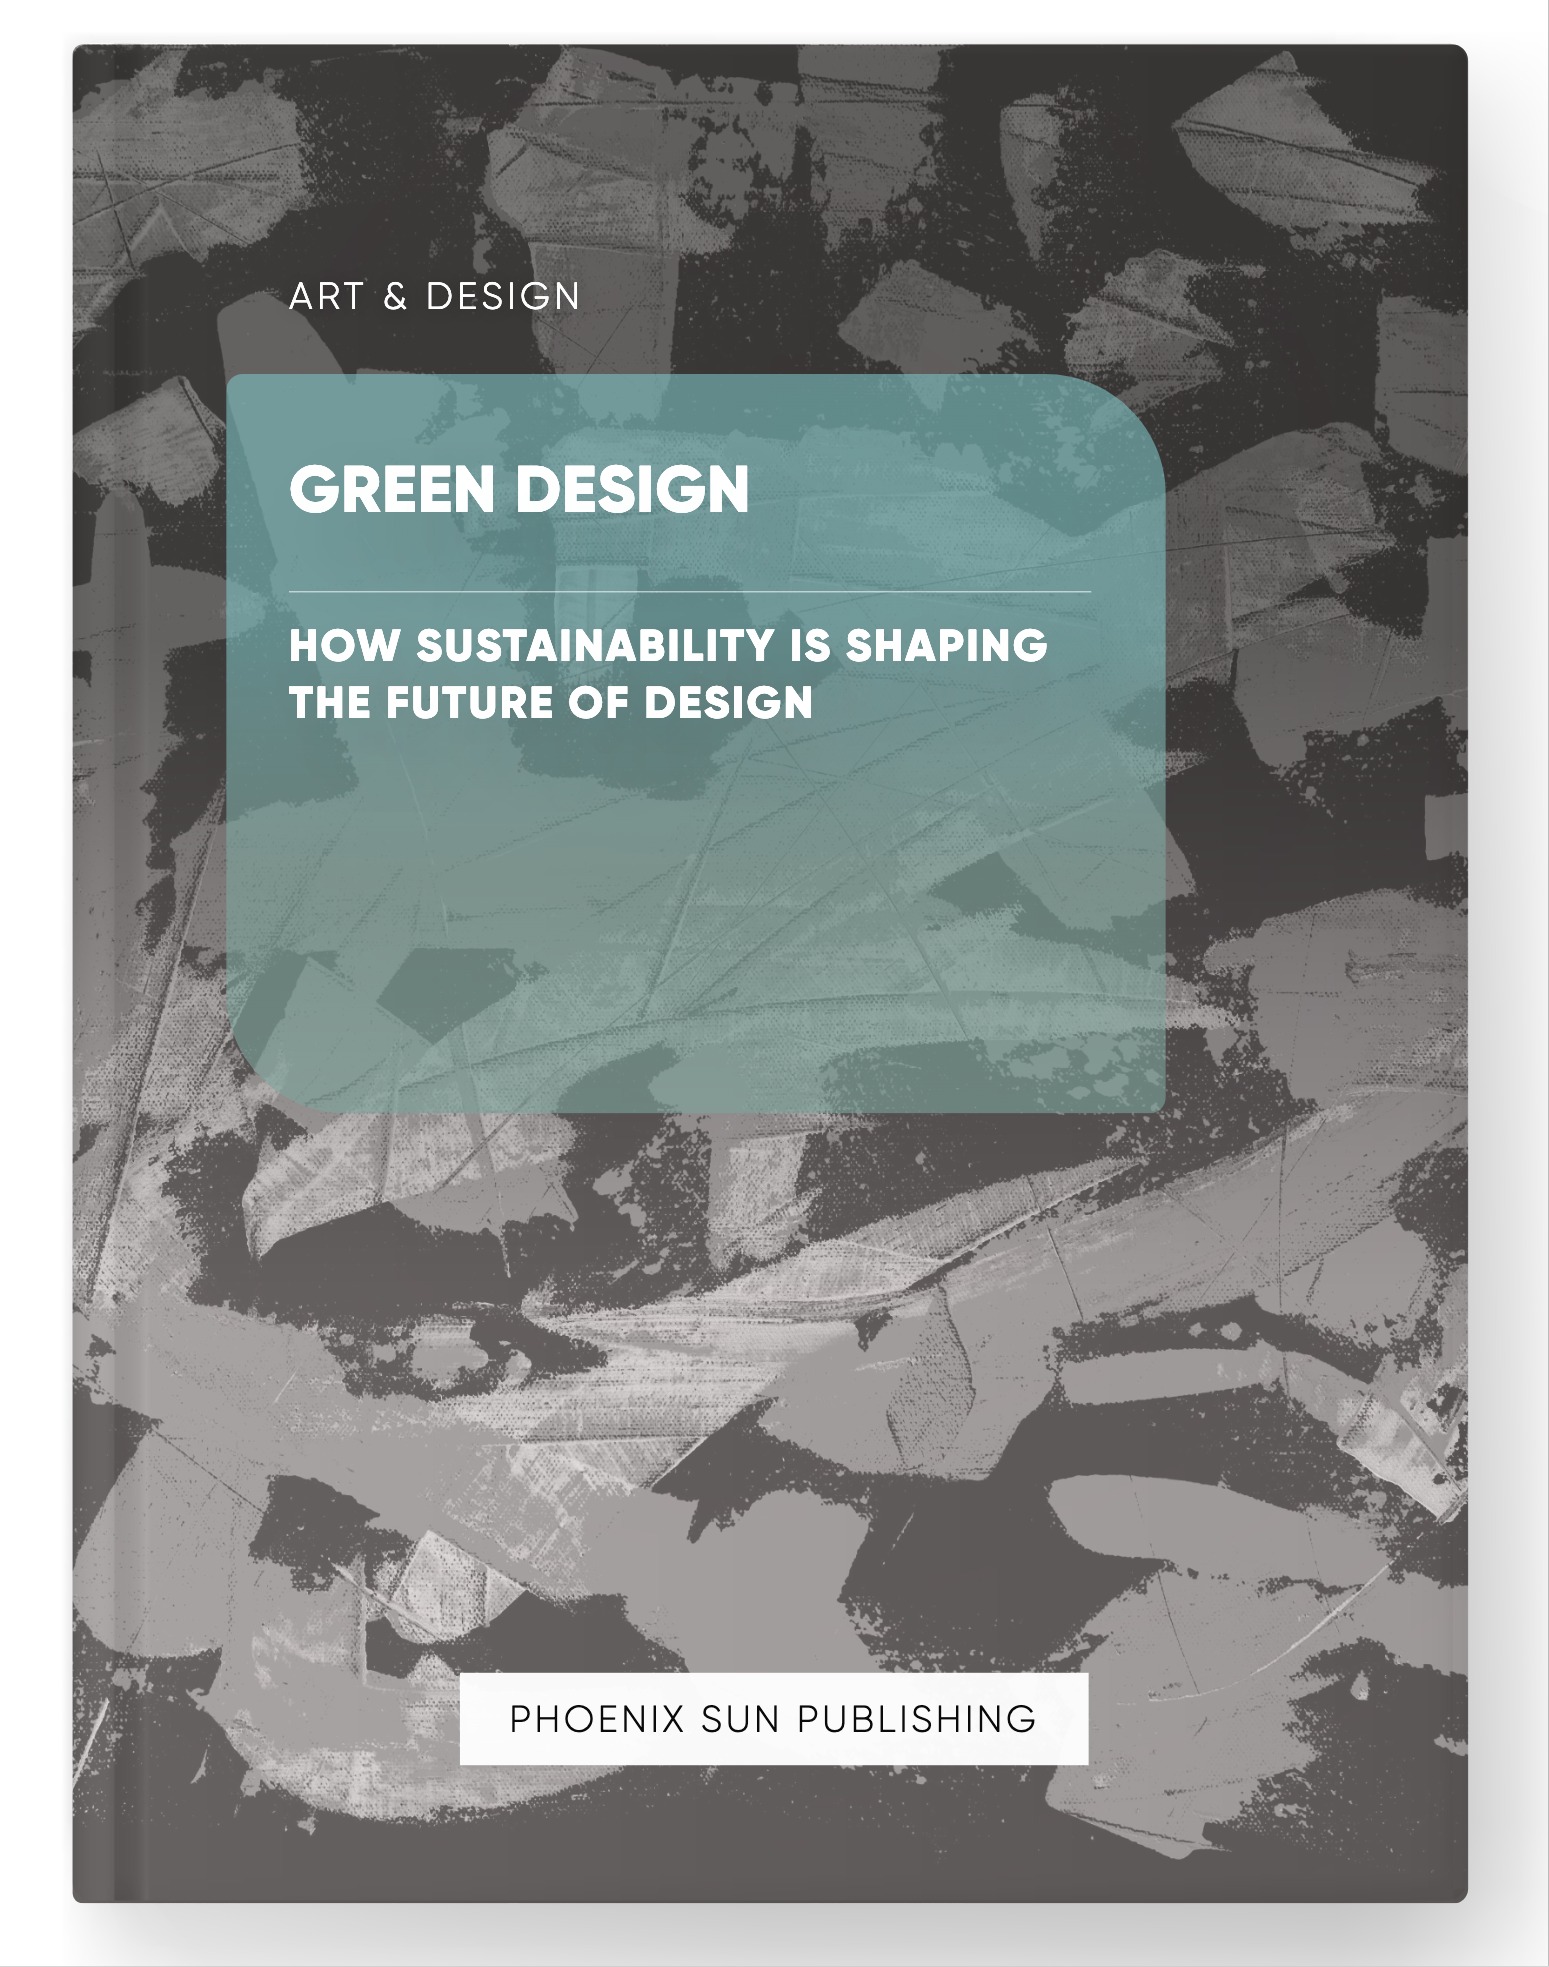 Green Design – How Sustainability is Shaping the Future of Design